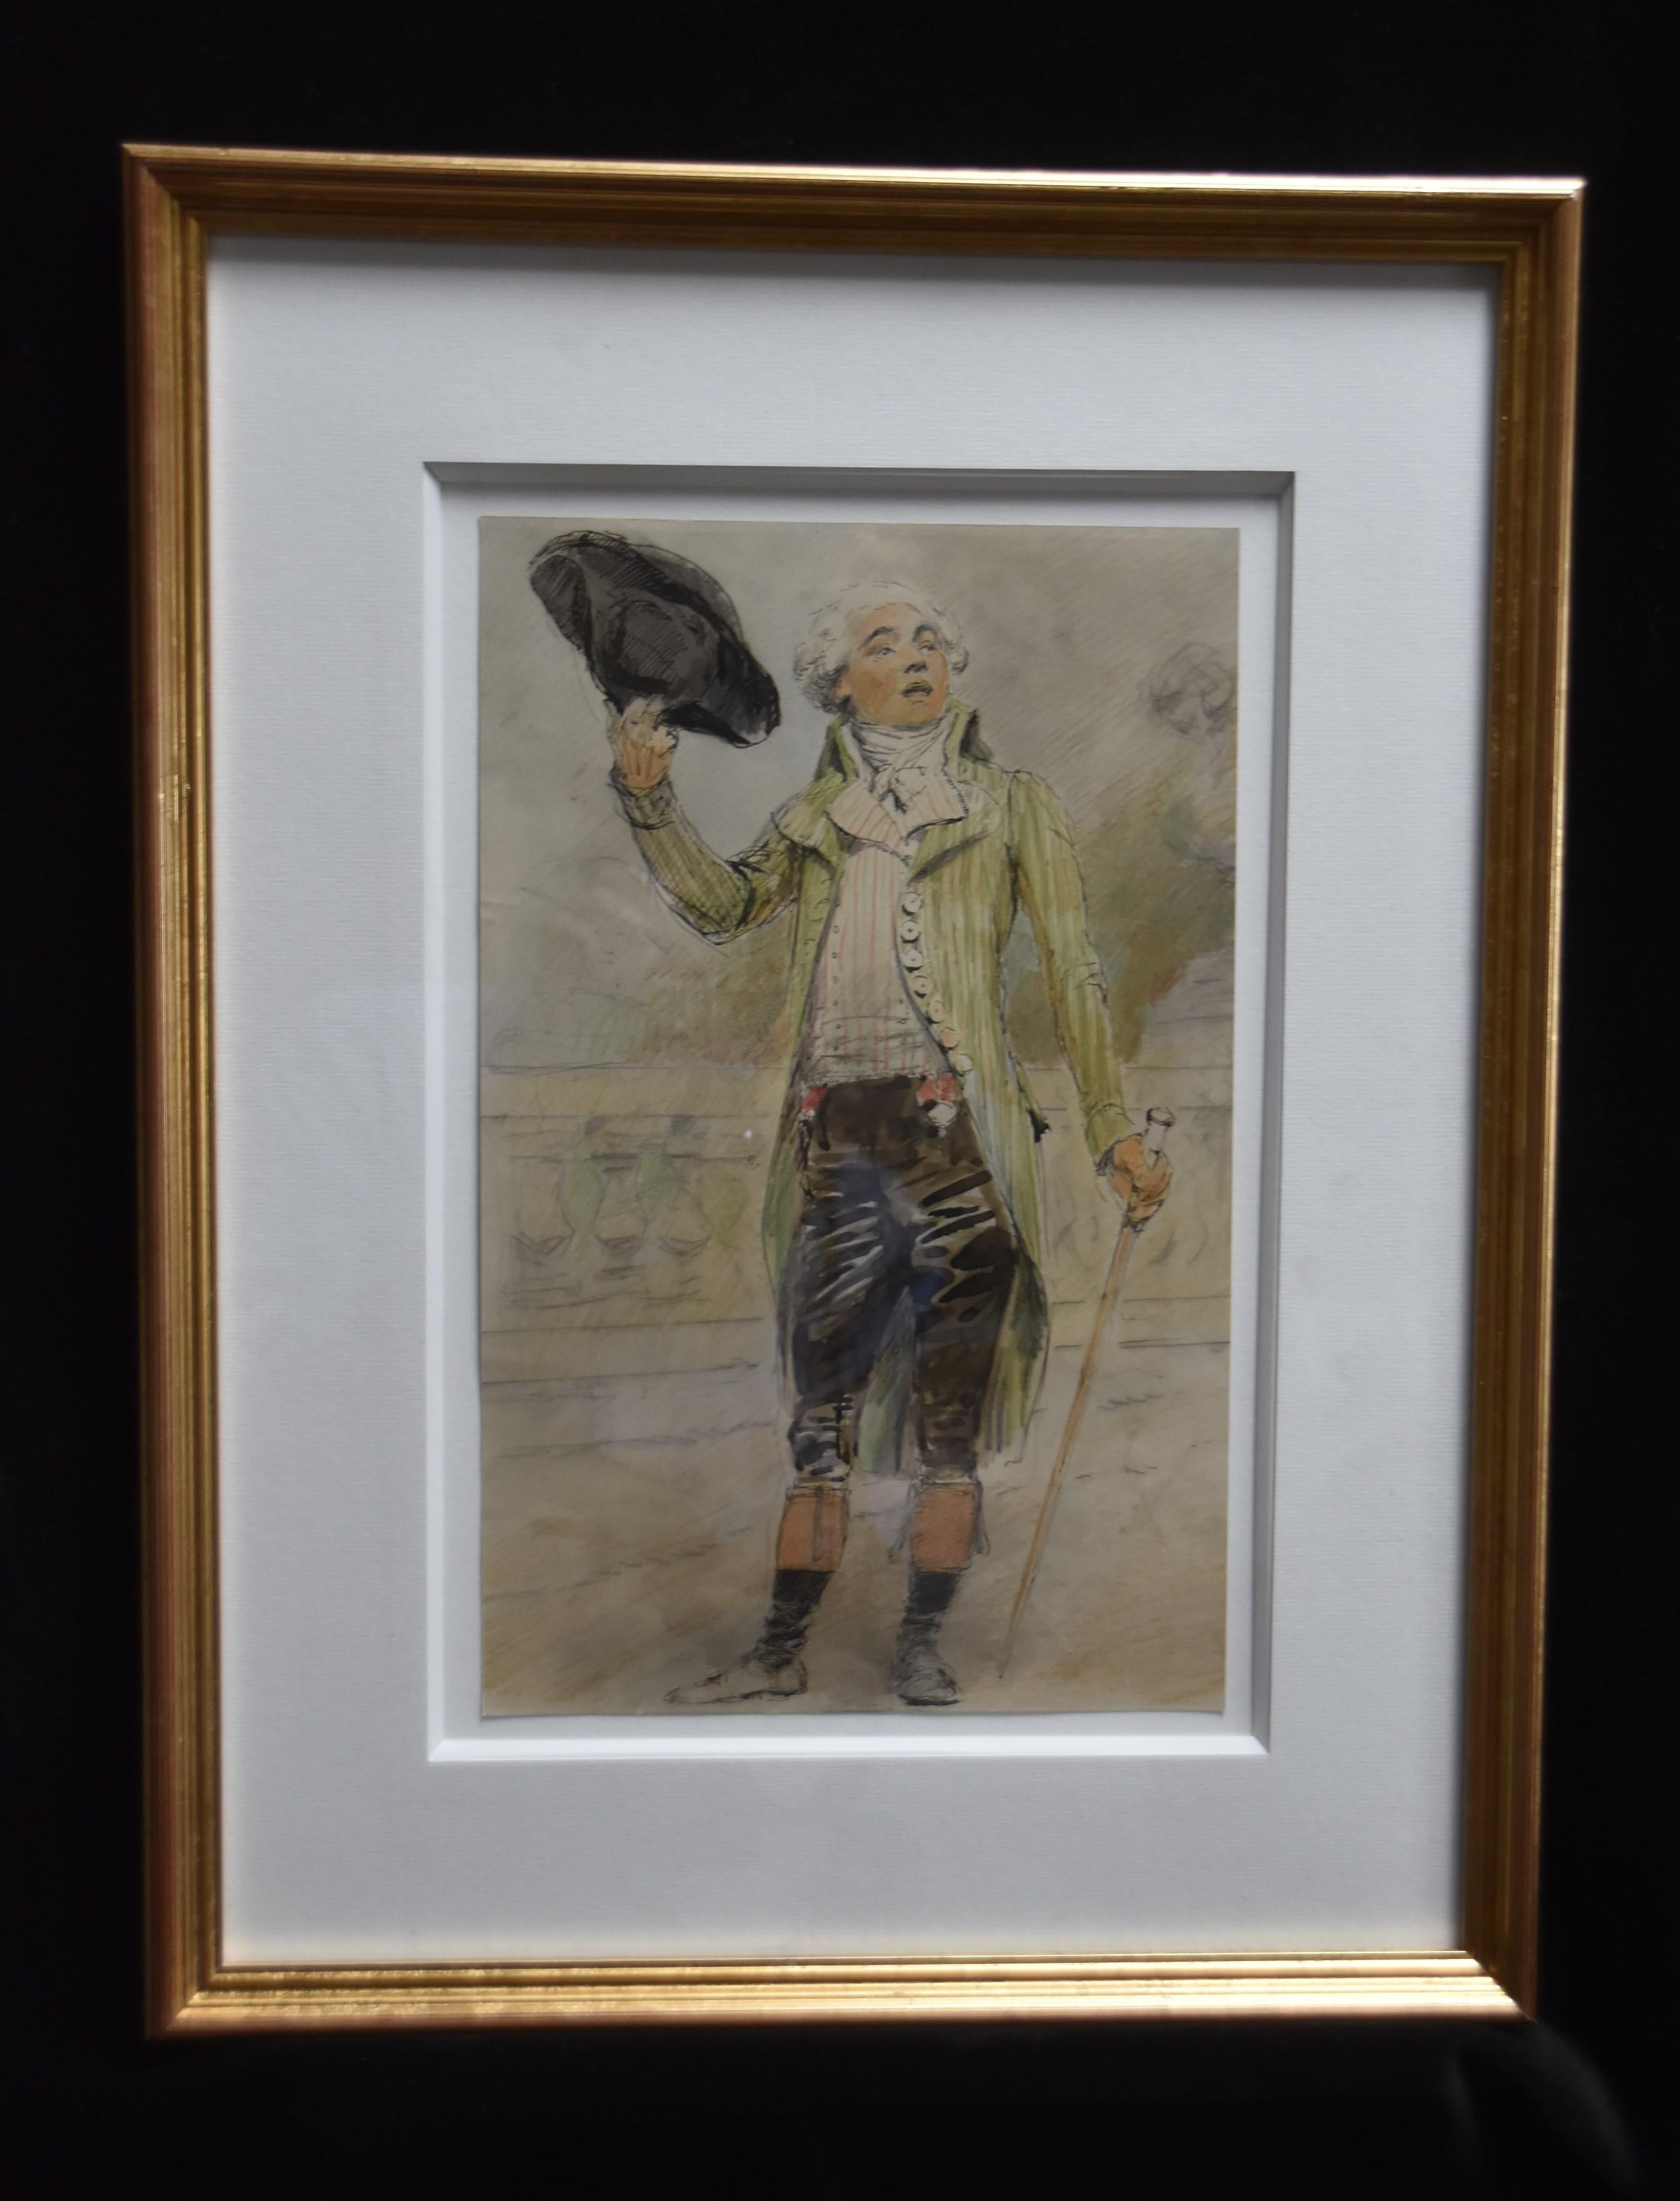 France 19th Century, A young man from the French Revolution era, watercolor - Art by Unknown